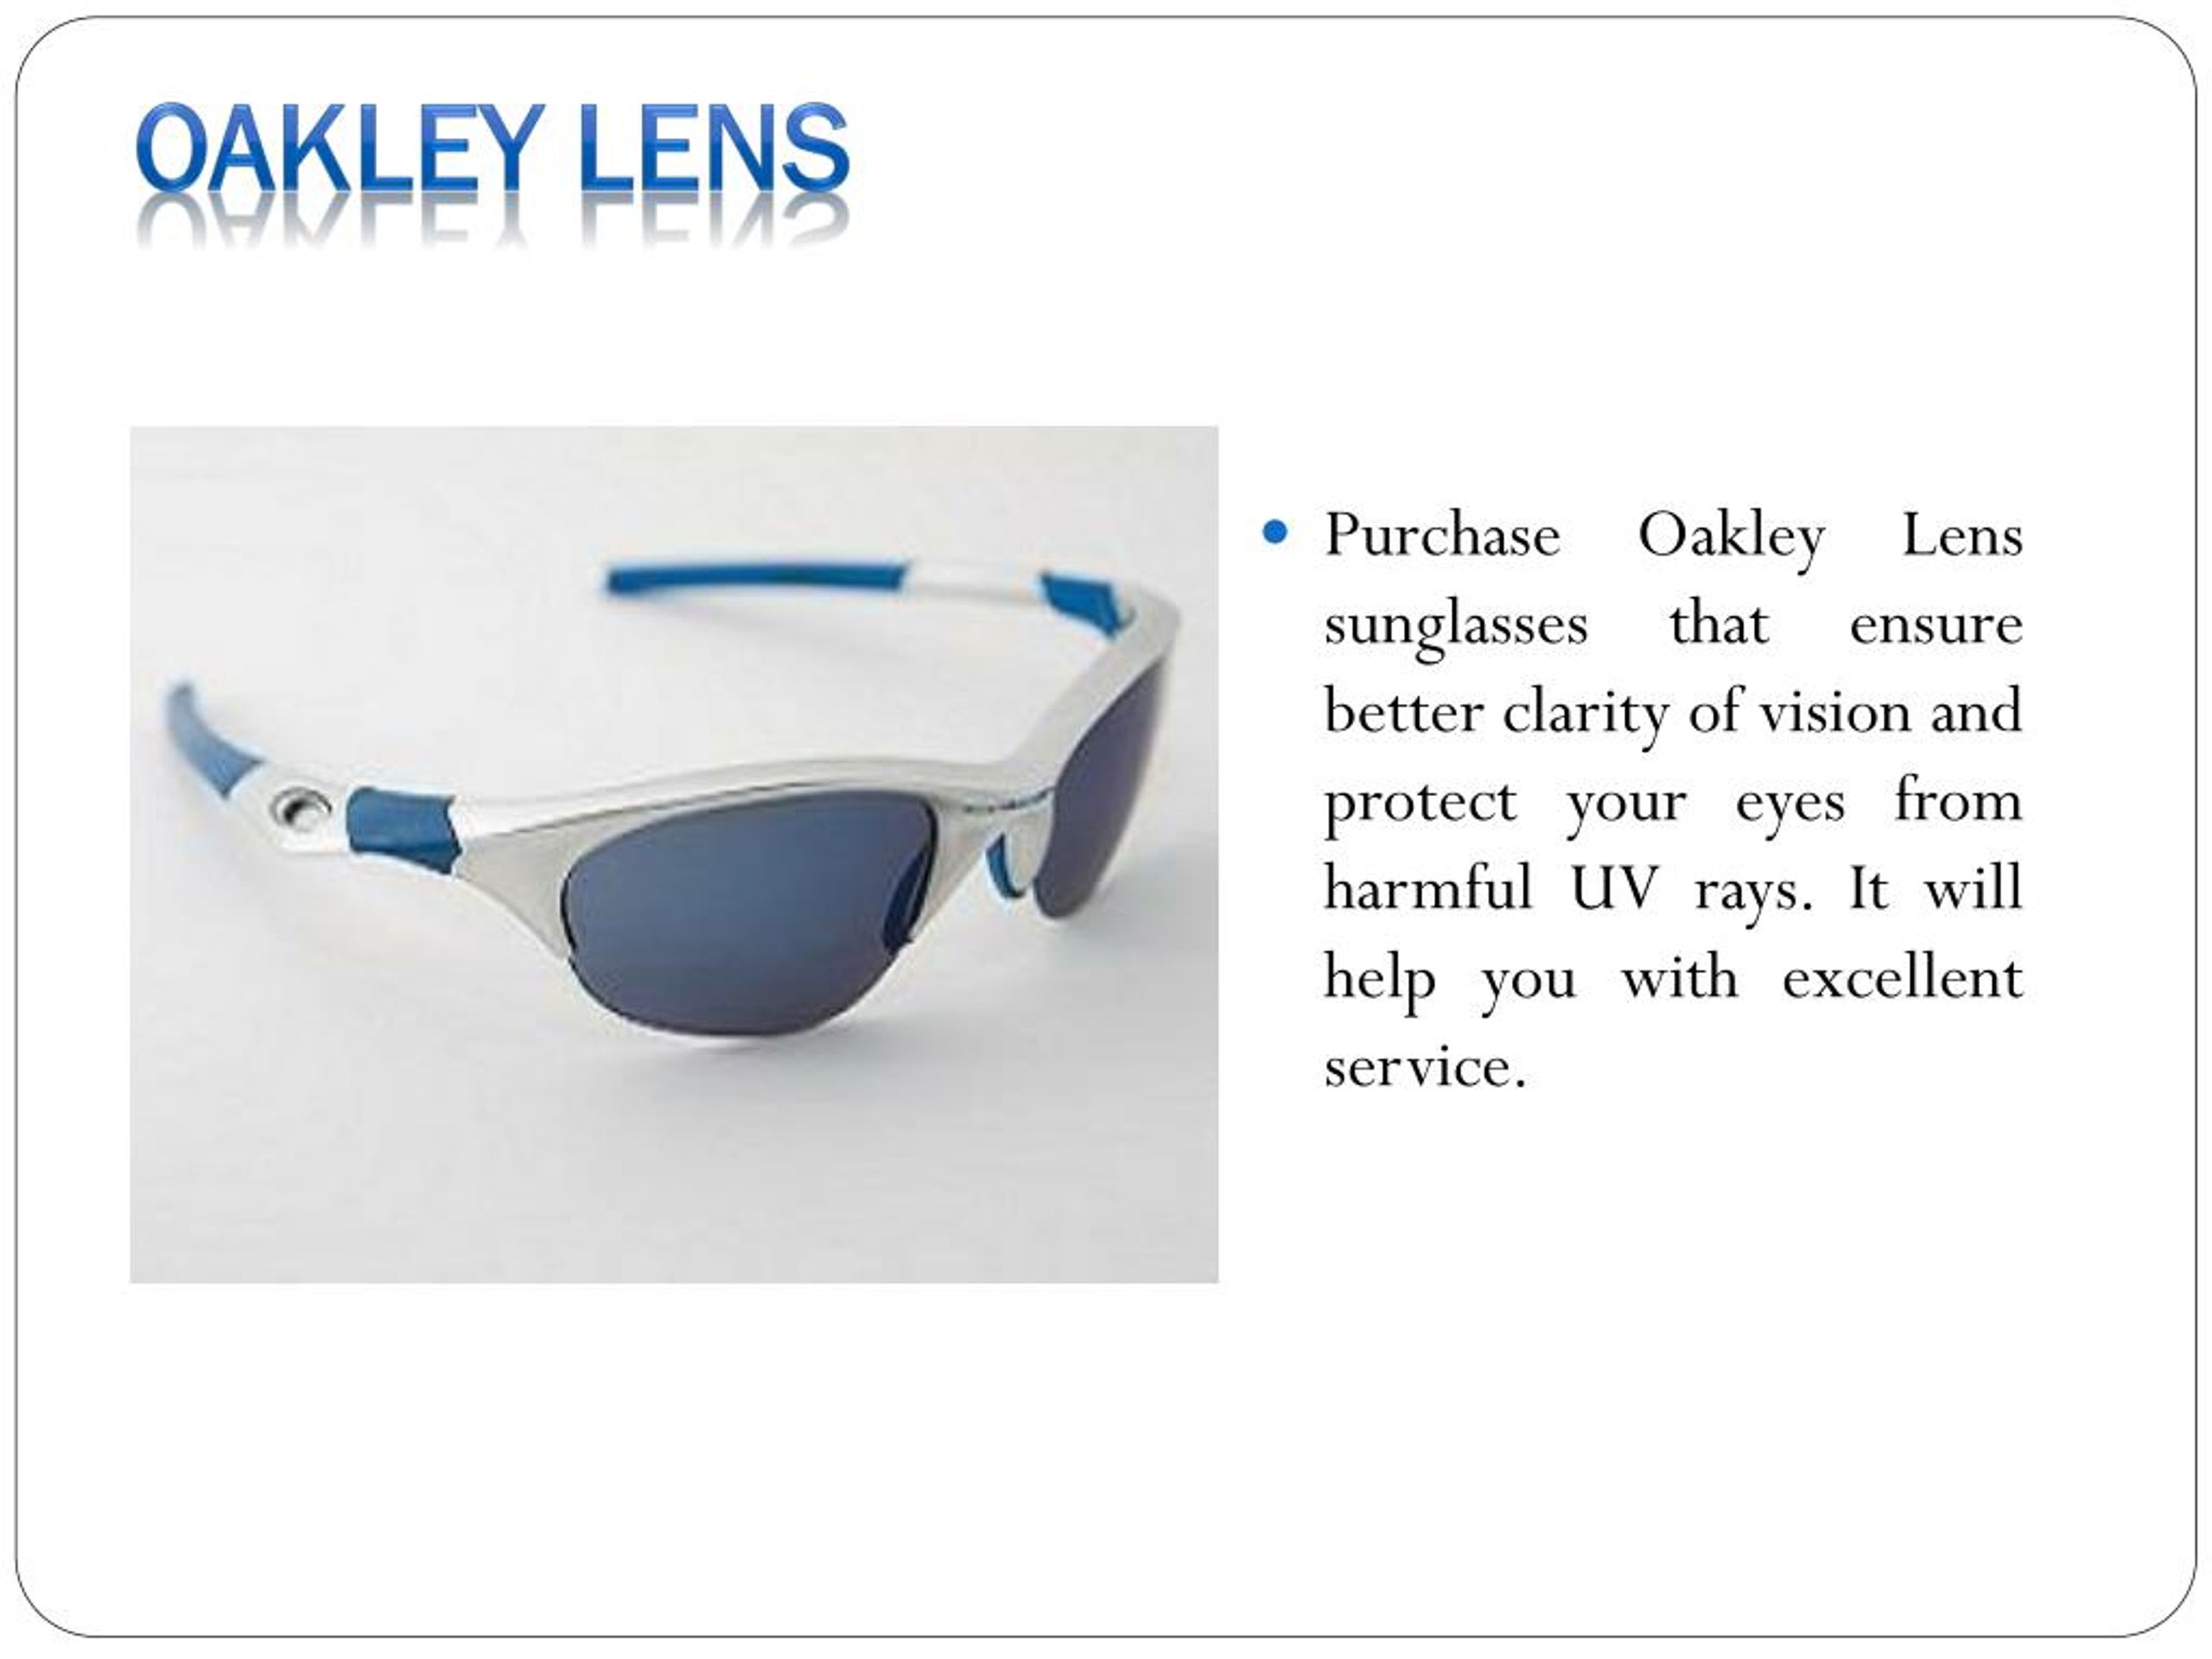 Ppt Oakley Sunglasses Lenses Powerpoint Presentation Free Download Id7746230 